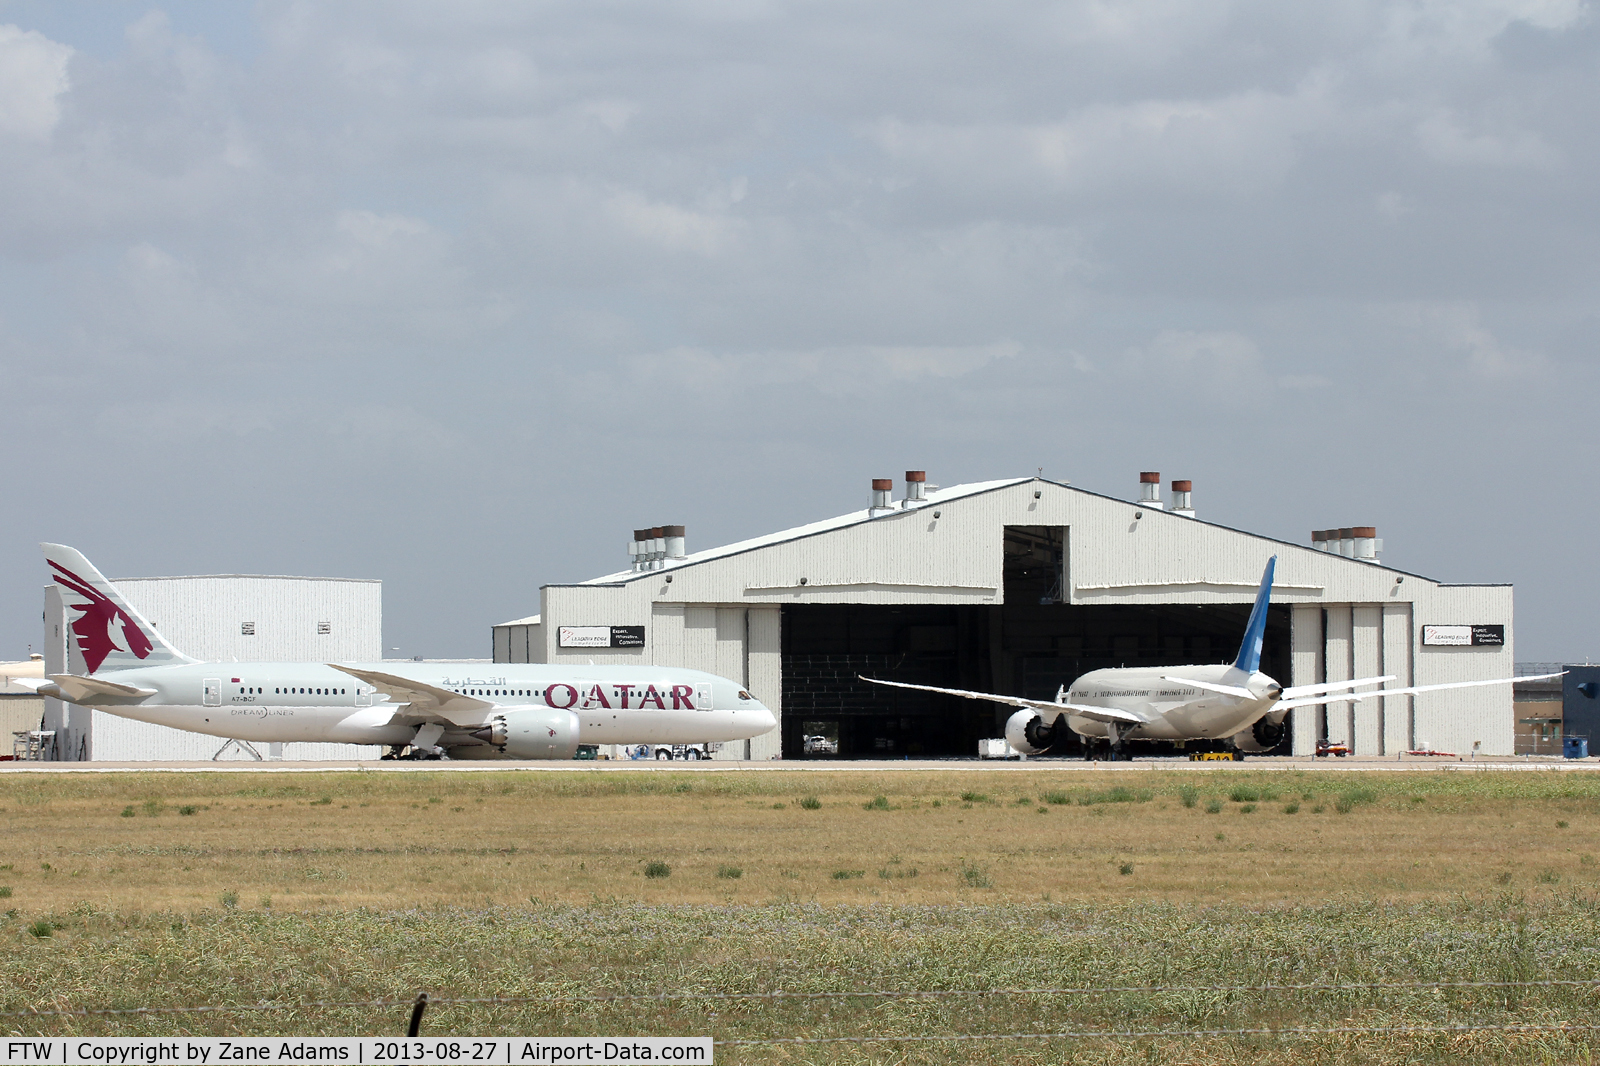 Fort Worth Meacham International Airport (FTW) - Two Boeing 787's at the paint hangar - Meacham Field, Fort Worth, TX 